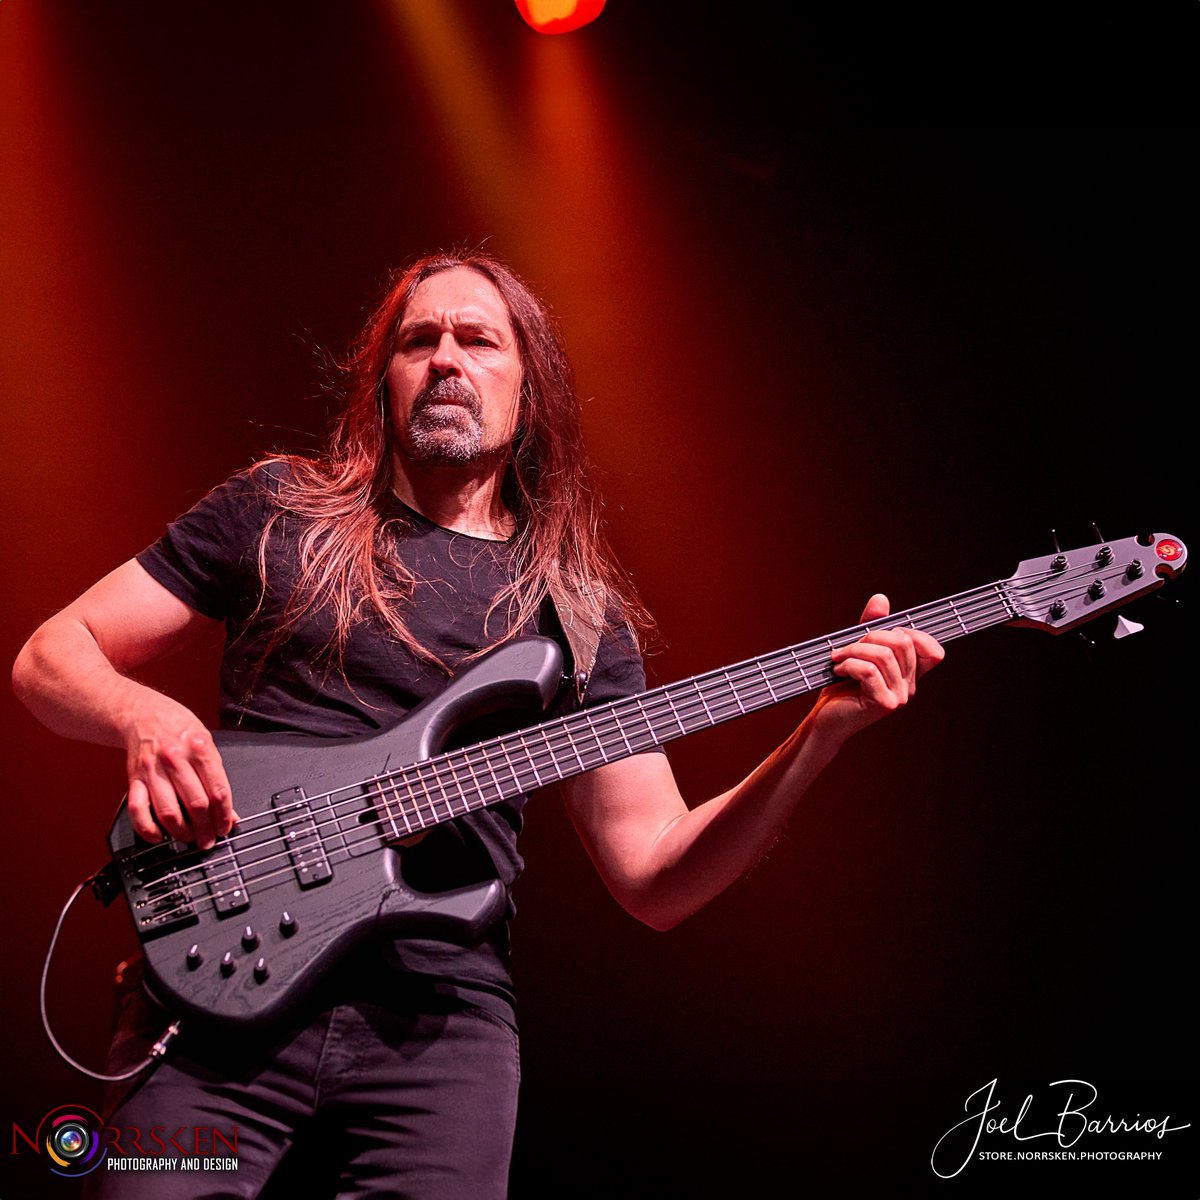 Join us in wishing a very metal birthday to our keeper of the low end, master of the four strings, the one and only @BillBodily! #BassMan #Bassist #BassMater #HappyBirthday #BillBodily